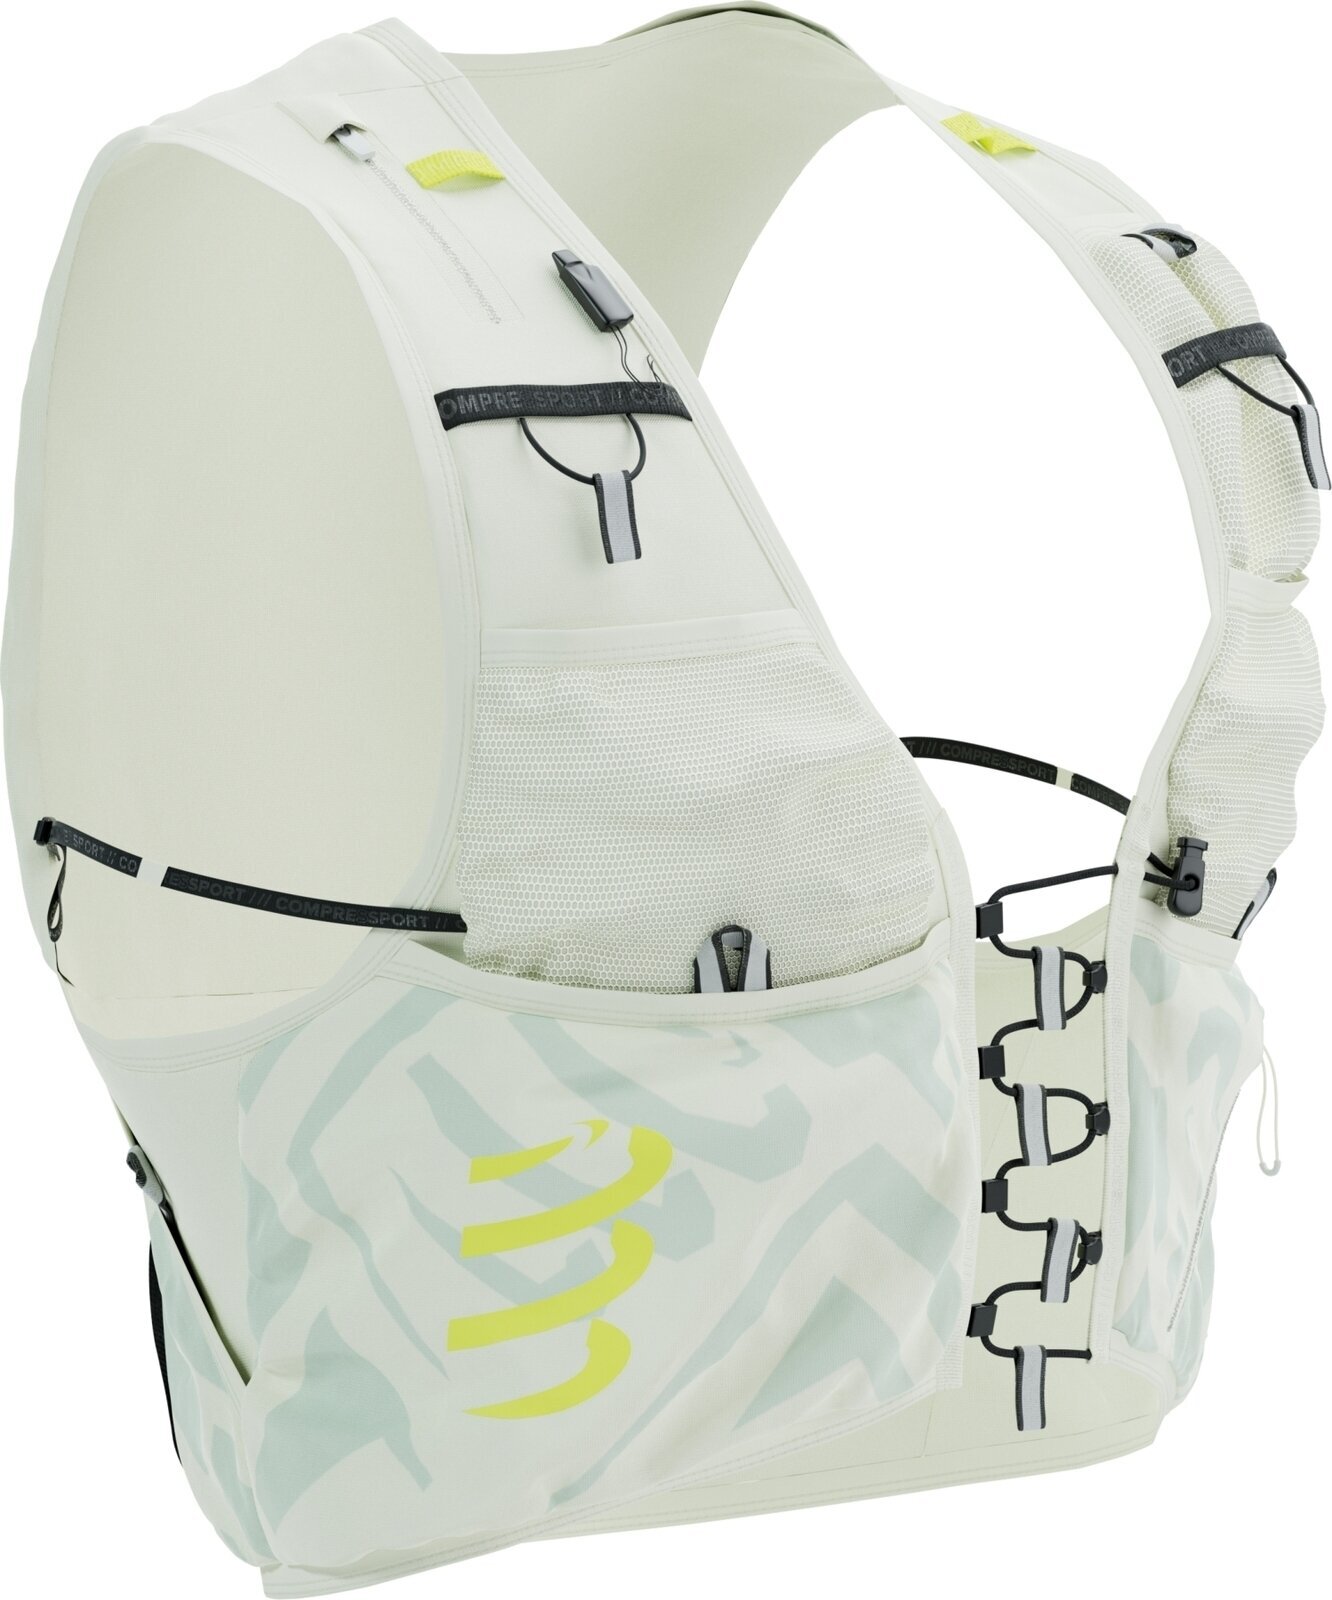 Running backpack Compressport UltRun S Pack Evo 10 Sugar Swizzle/Ice Flow/Safety Yellow L Running backpack